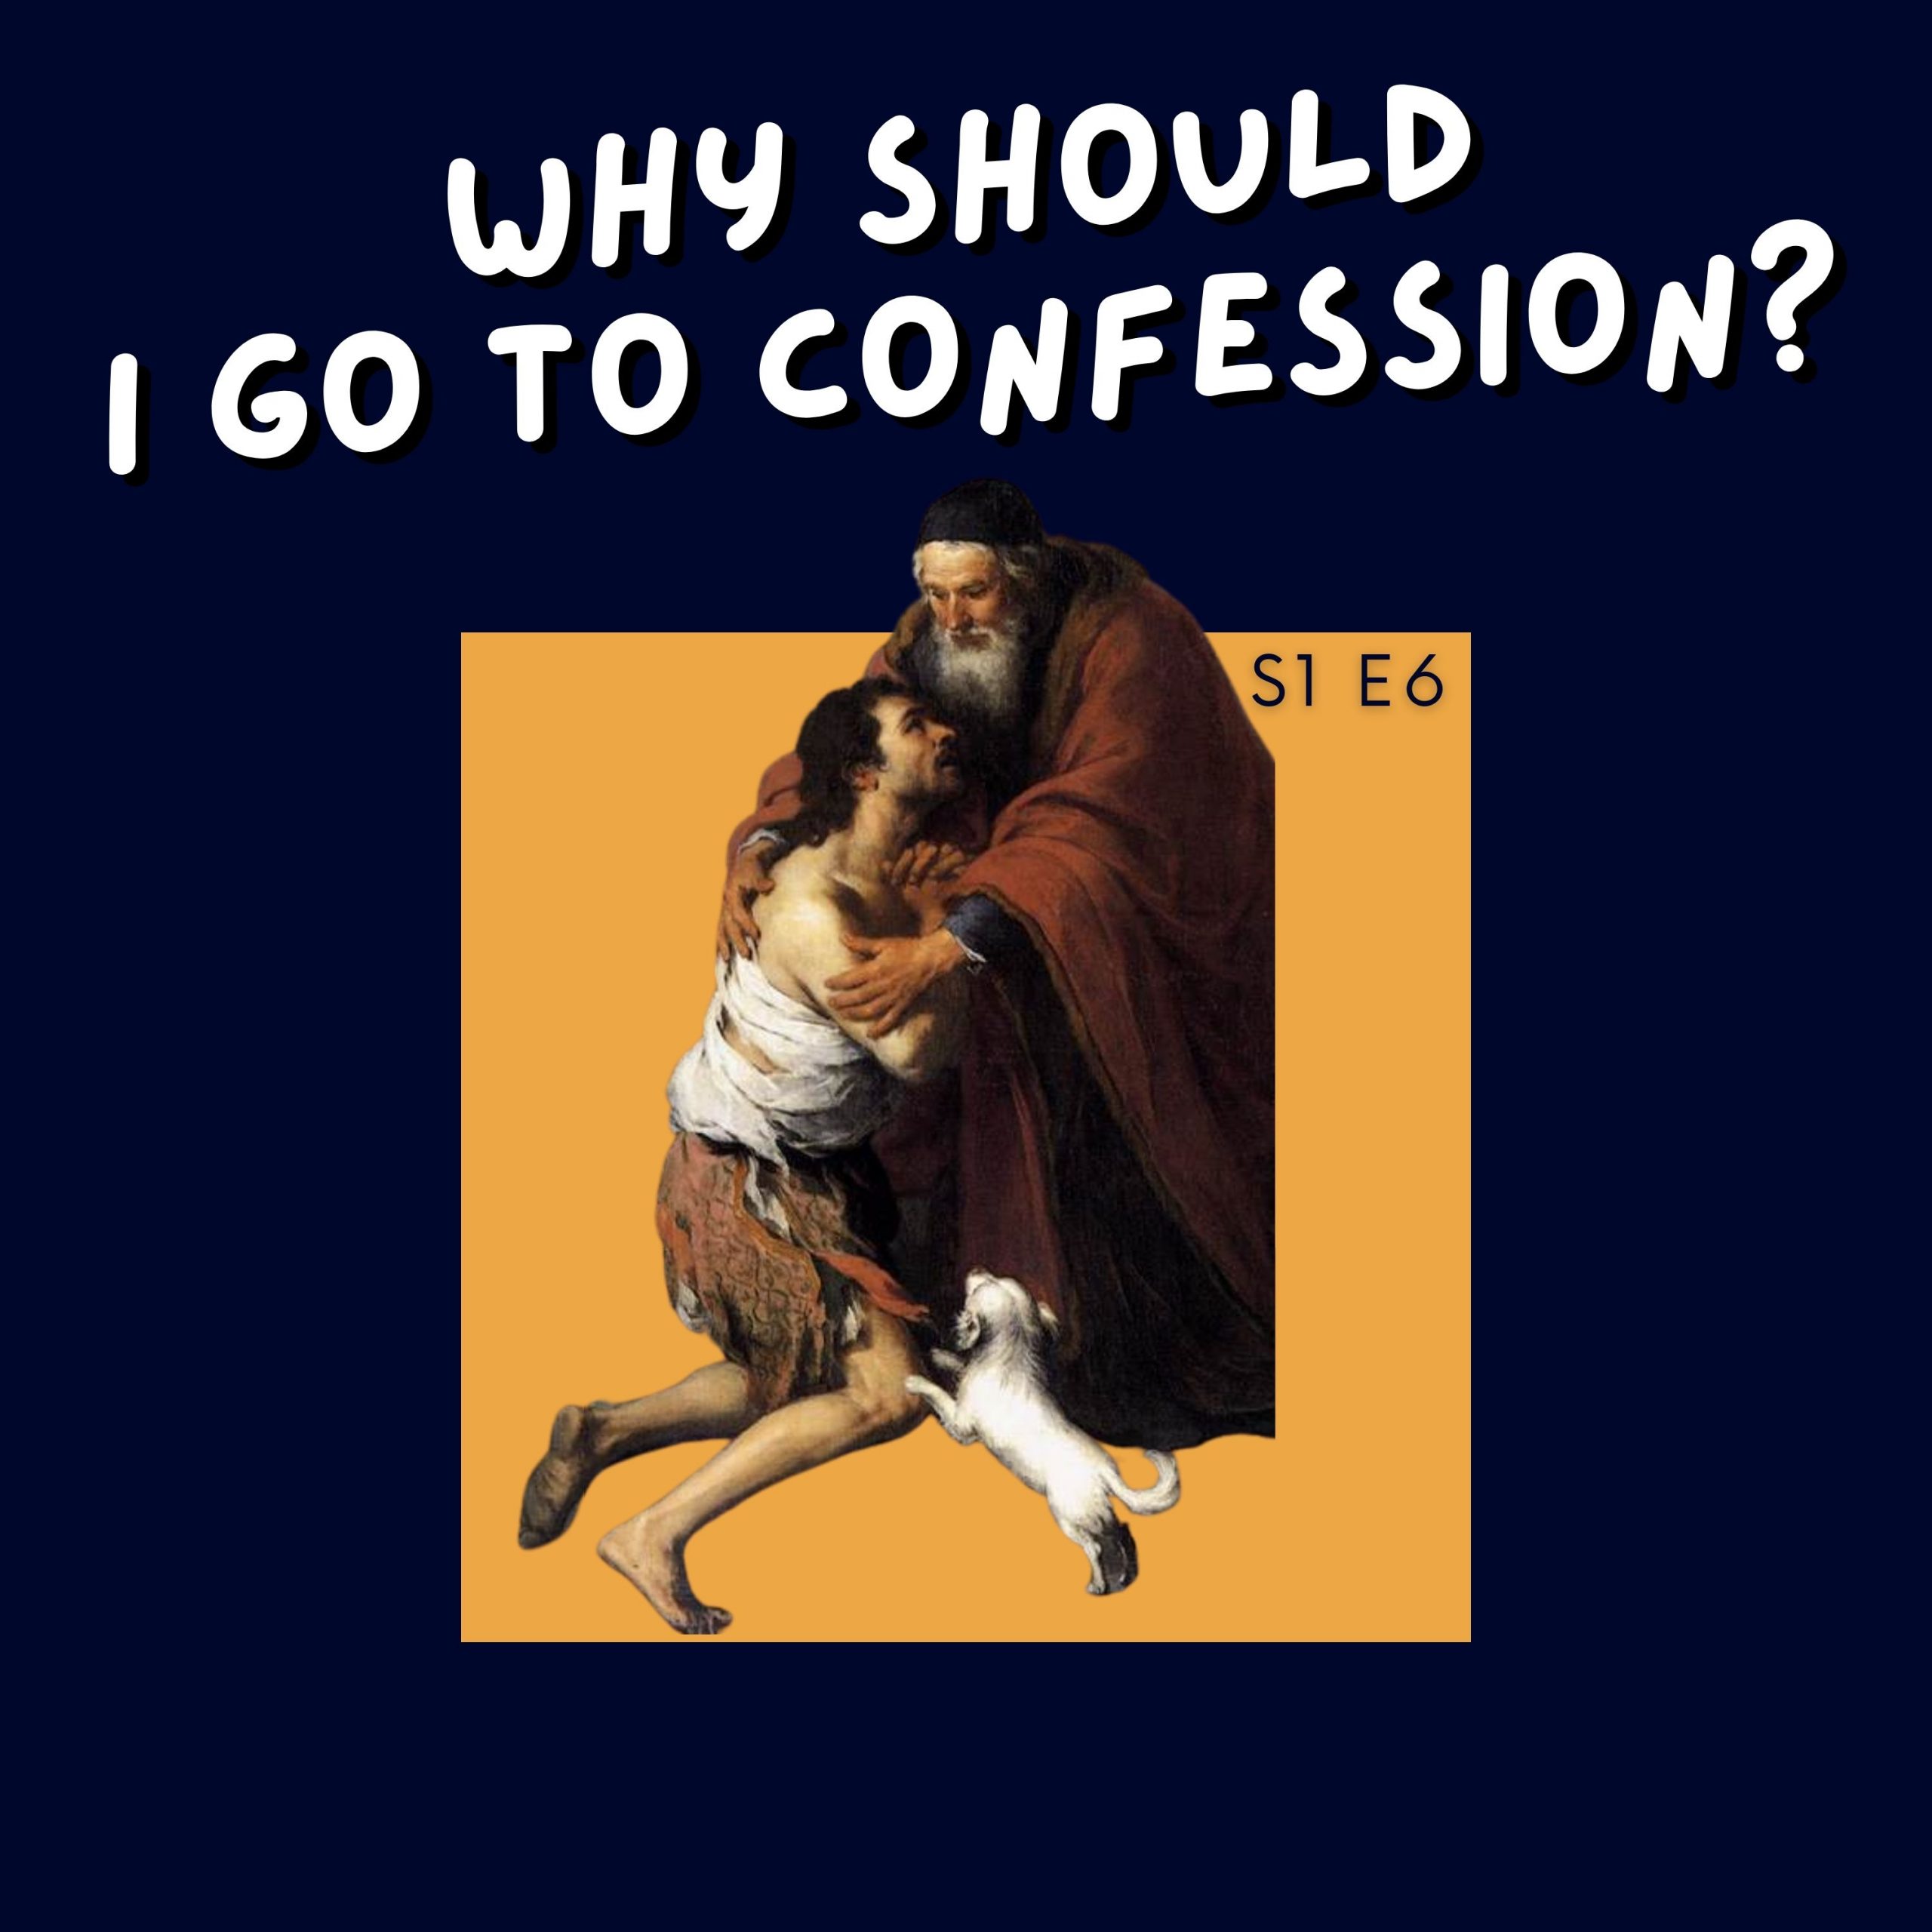 Episode 6: Why Should I Go to Confession?